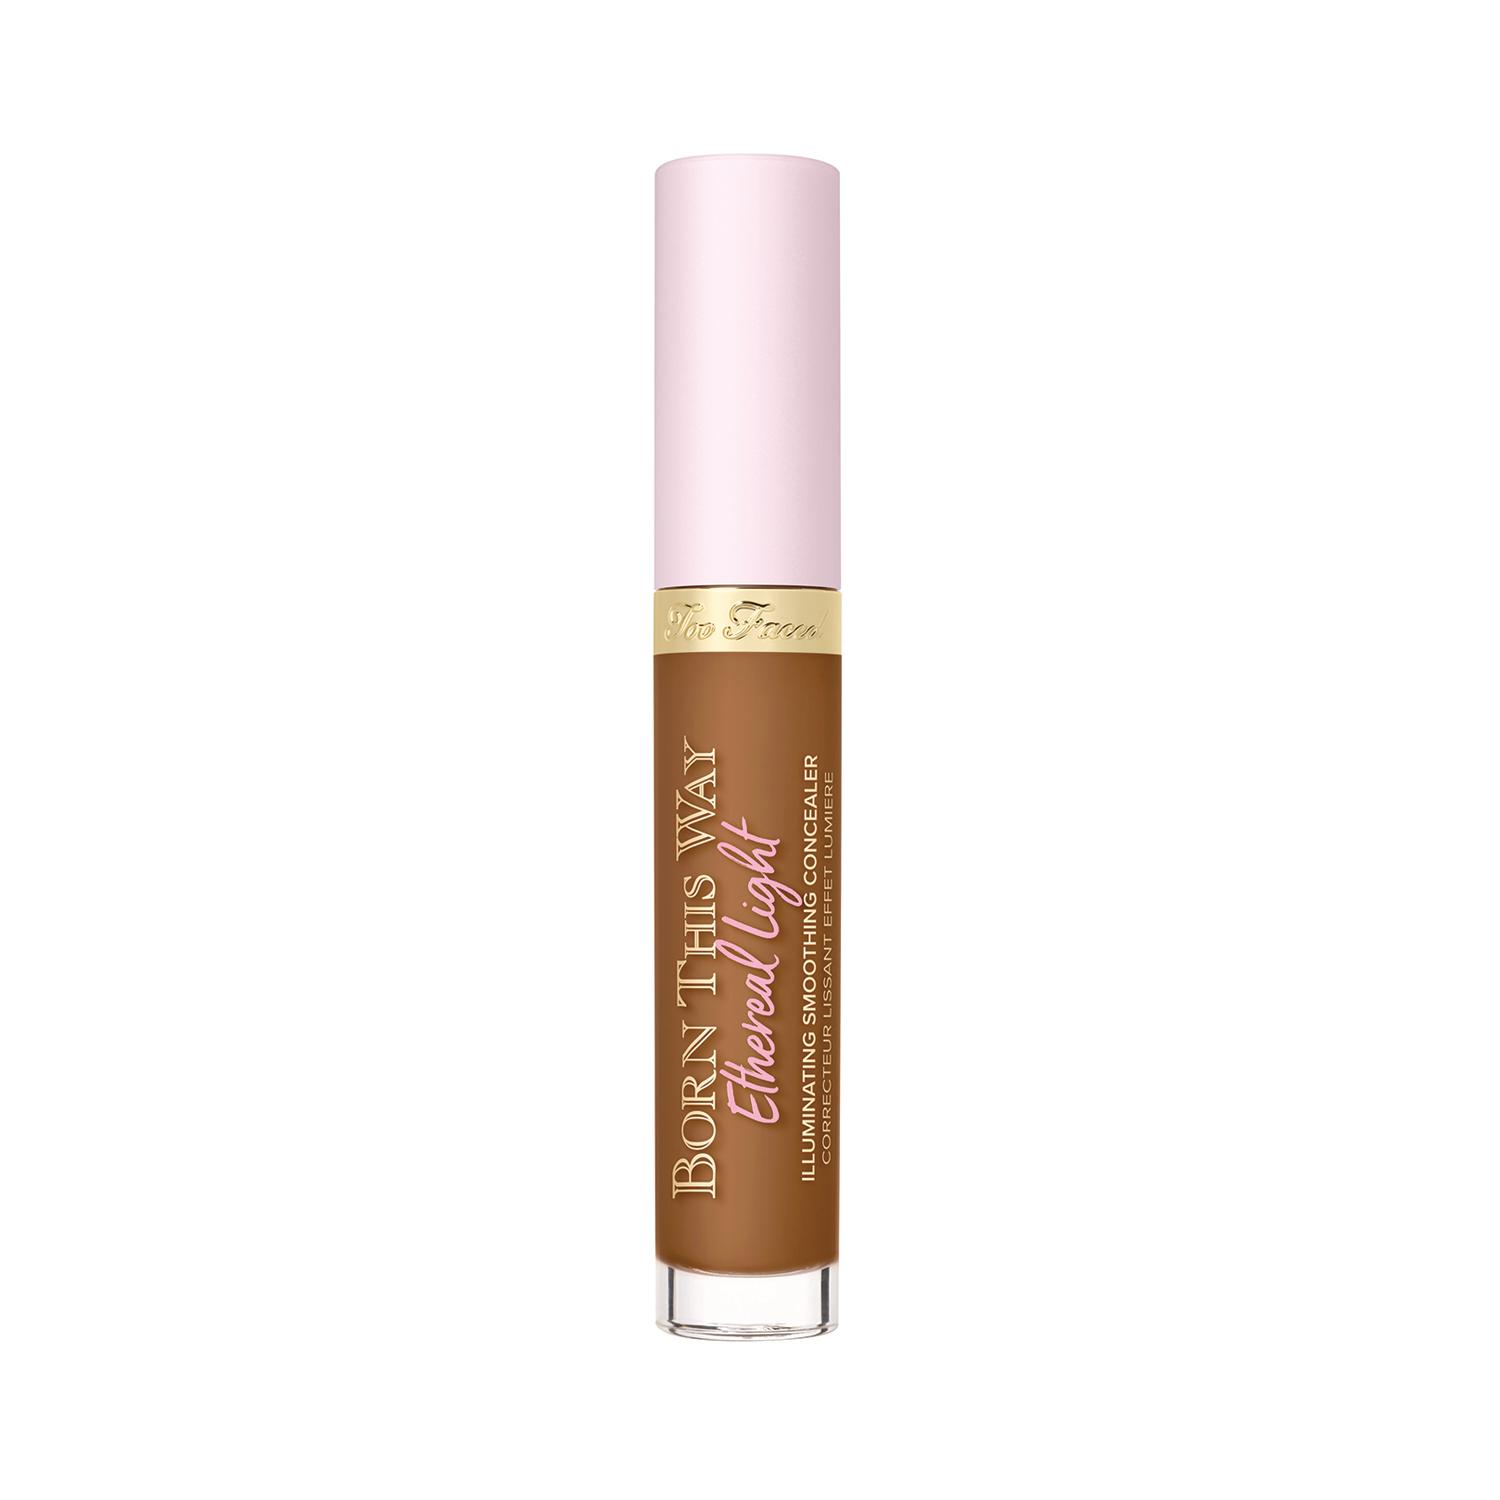 Too Faced | Too Faced Born This Way Illuminating Concealer - Chocolate Truffle (5ml)